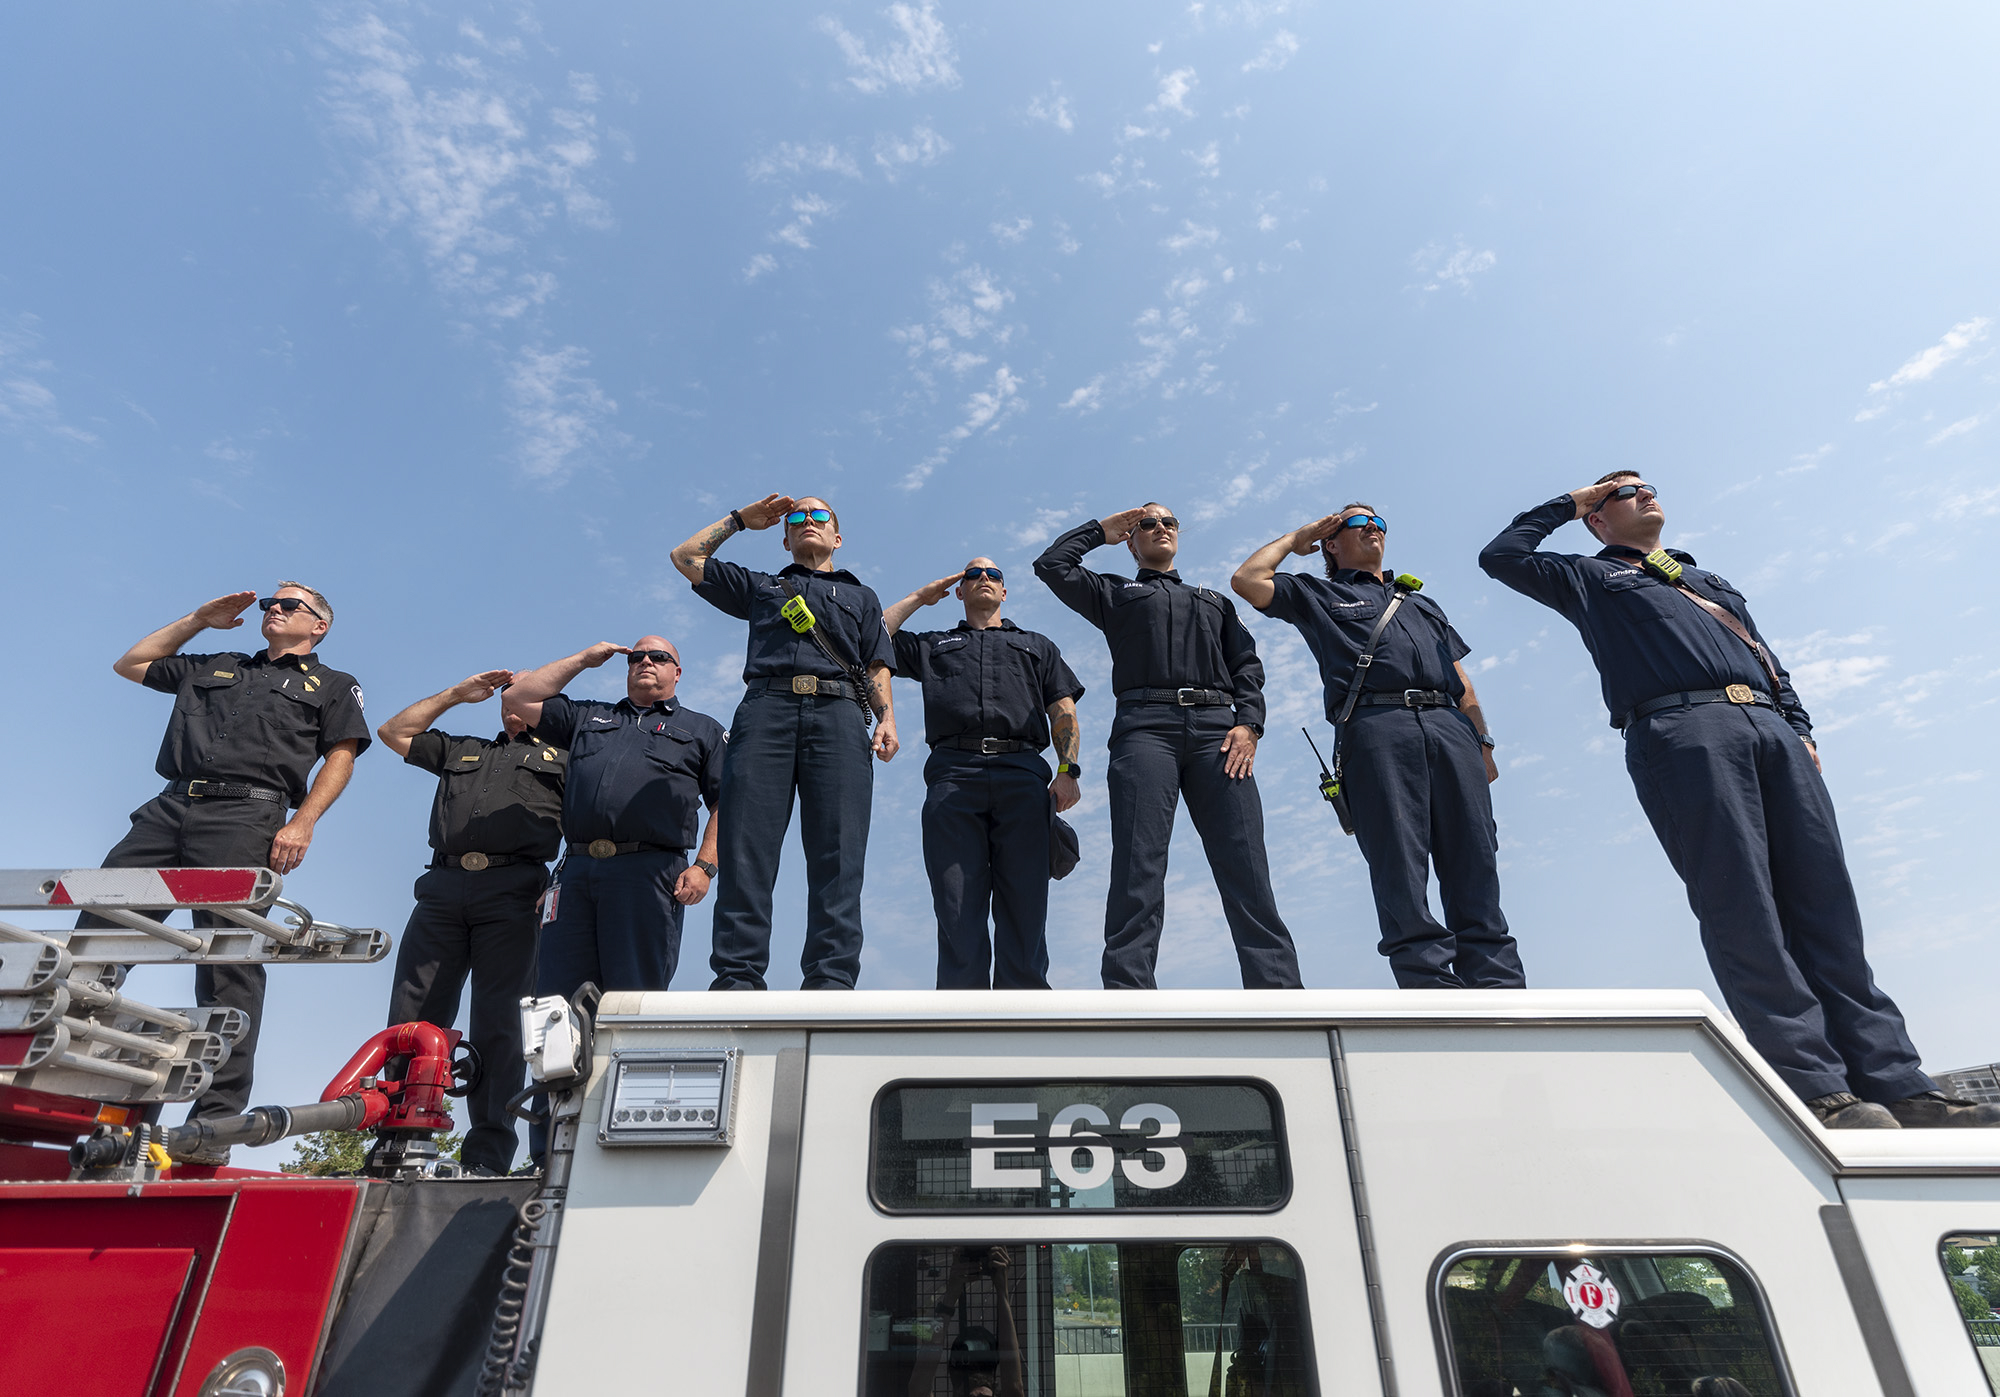 EMT's and firefighters from Clark County Fire District 6 stand atop a firetruck and salute as a funeral procession for Clark County Sheriff's Sgt. Jeremy Brown drives north on I-5 on Tuesday, Aug. 3, 2021, at the NE 139th Street overpass in Vancouver.